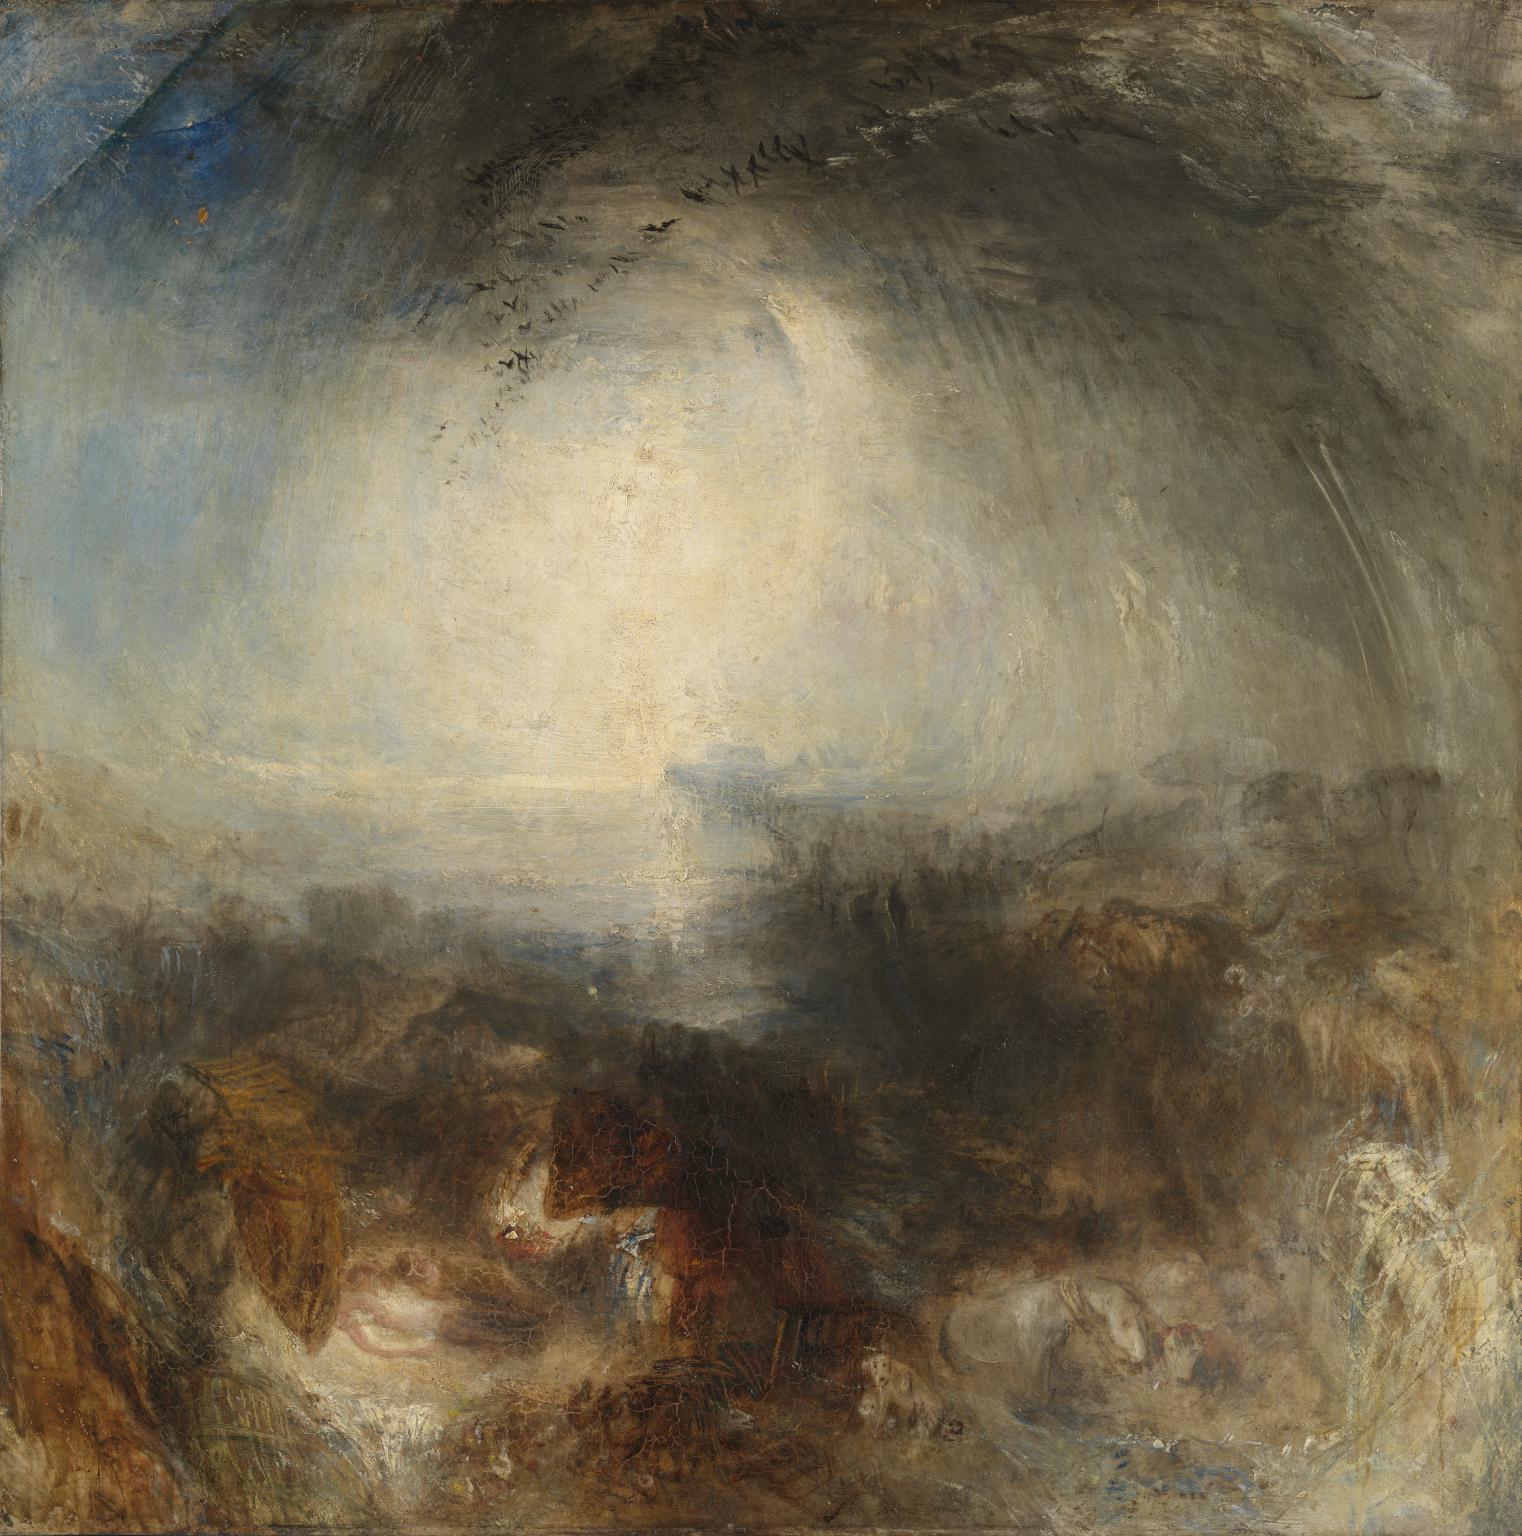 Shade and Darkness - the Evening of the Deluge exhibited 1843 Joseph Mallord William Turner 1775-1851 Accepted by the nation as part of the Turner Bequest 1856 http://www.tate.org.uk/art/work/N00531